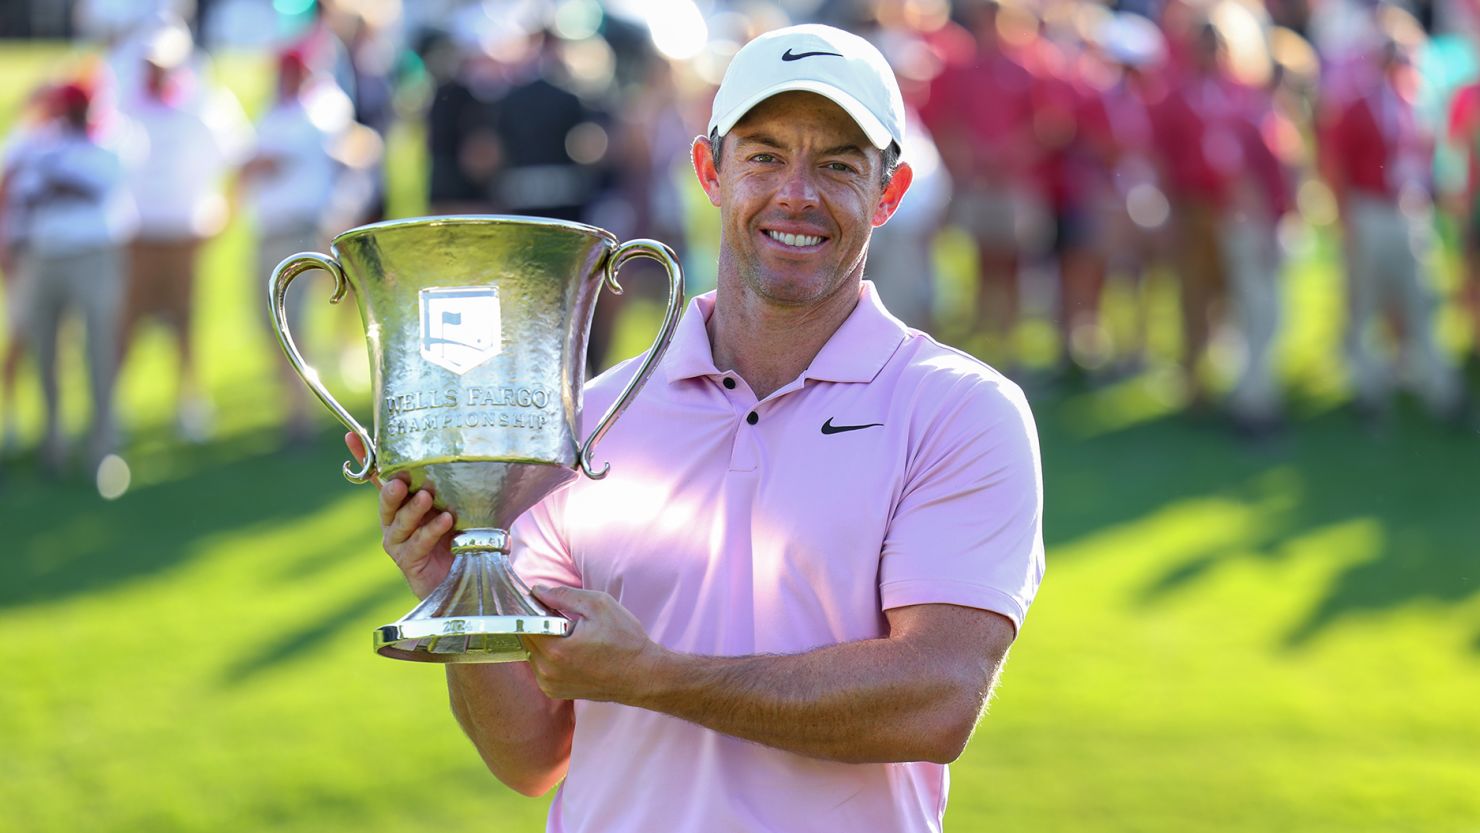 Here’s How Much Rory McIlroy Won at the Wells Fargo Championship